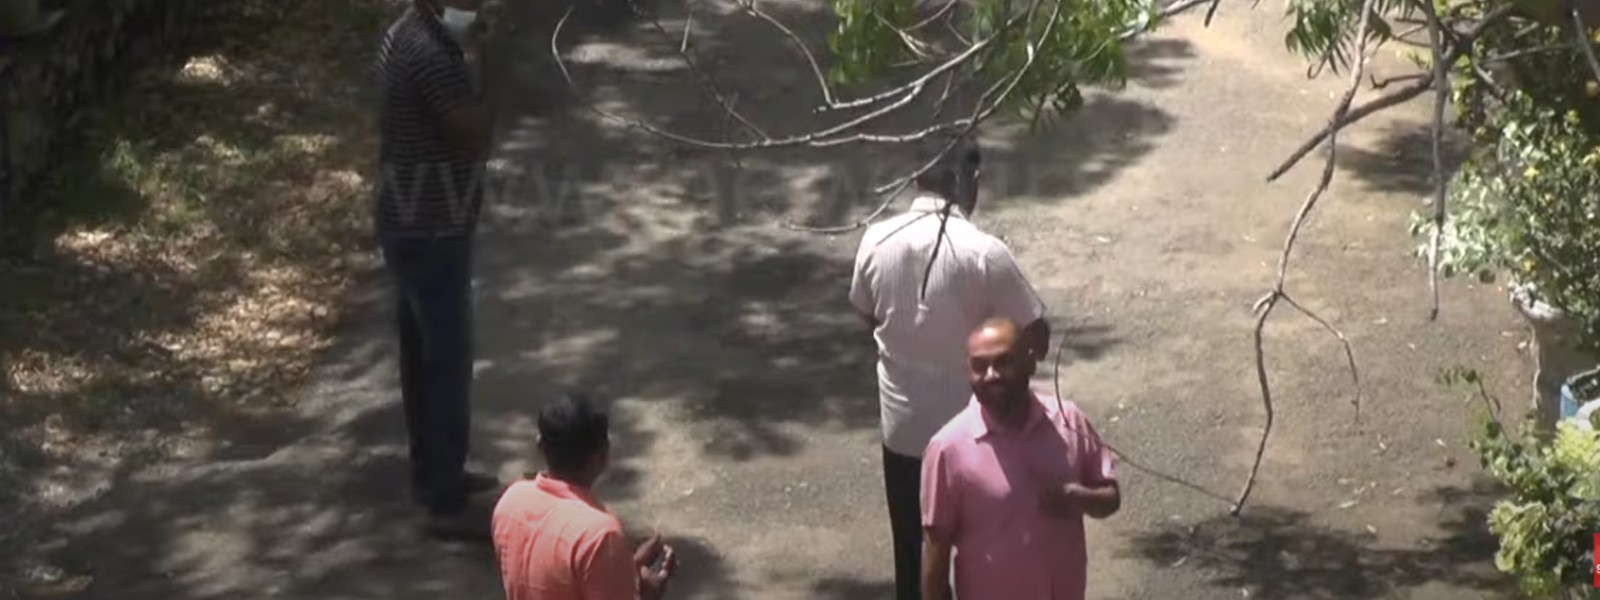 (VIDEO) Sri Lankan Minister forced to flee after angry mob protest against his visit